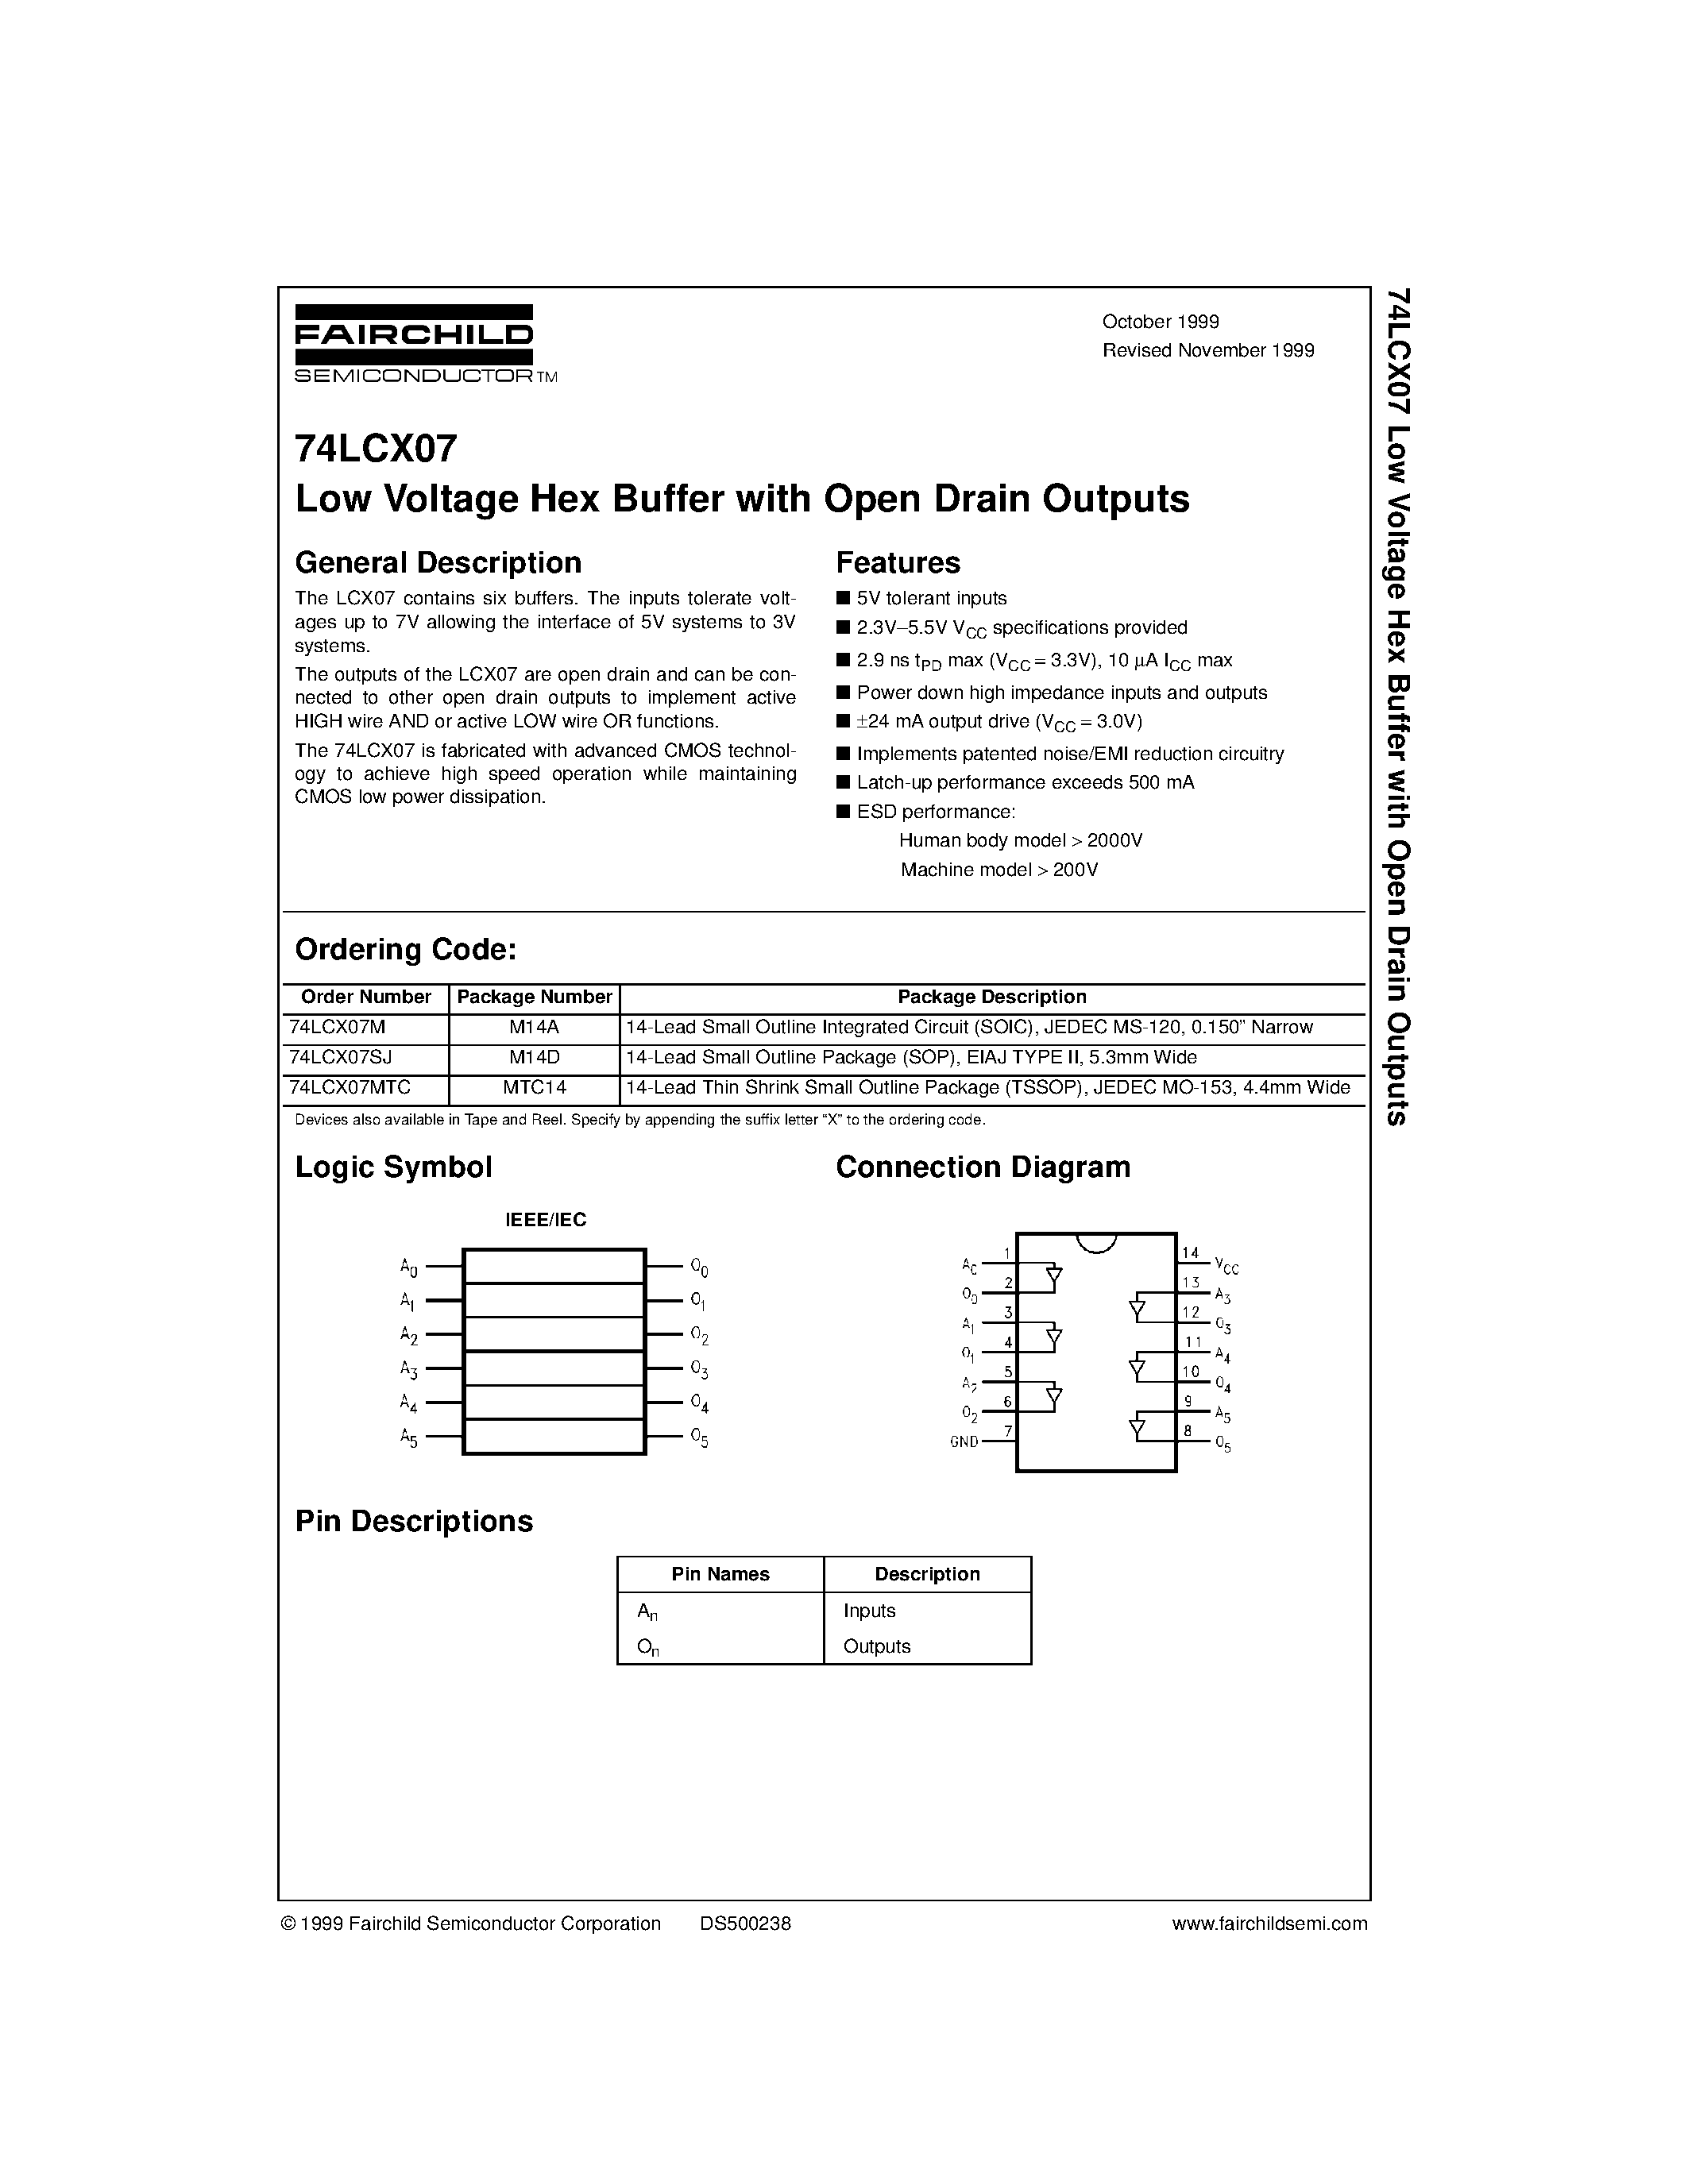 Datasheet 74LCX07 - Low Voltage Hex Buffer with Open Drain Outputs page 1